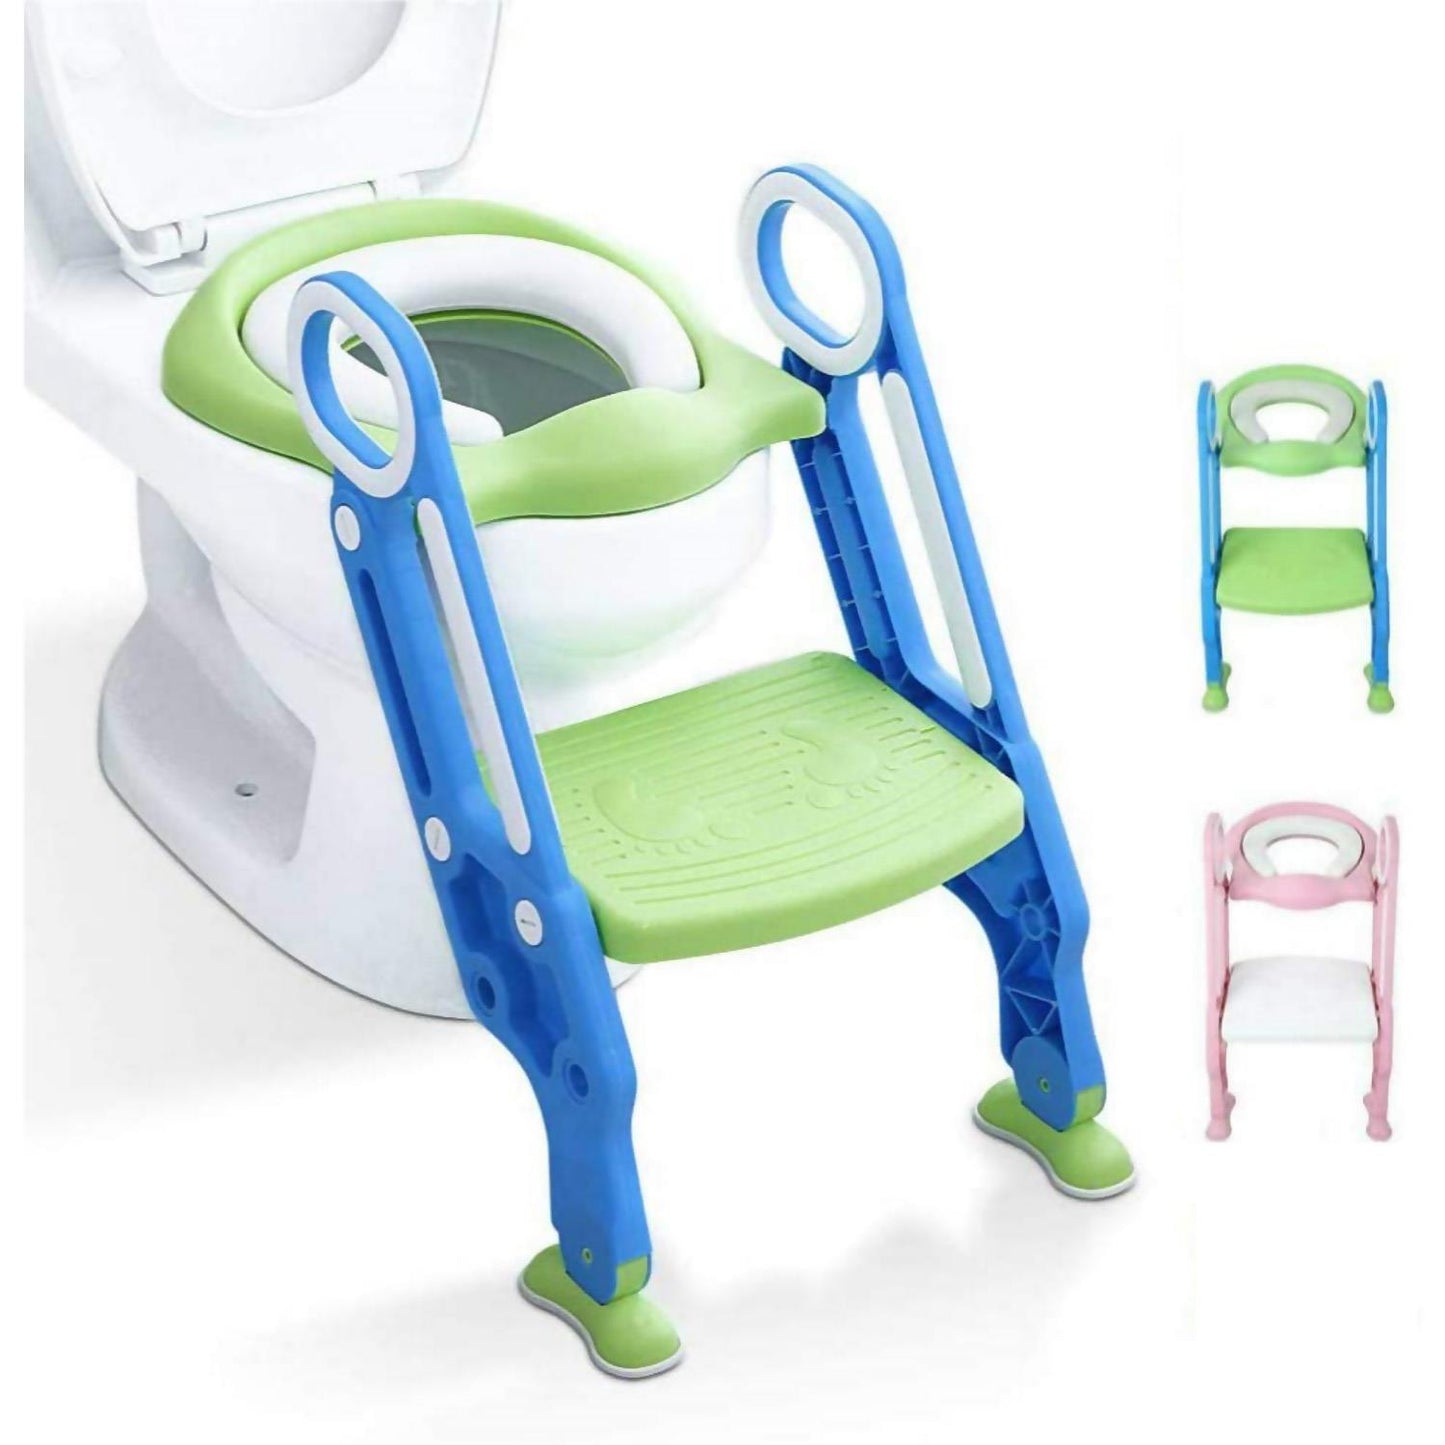 Help Your Child Learn to Use the Toilet with Ease